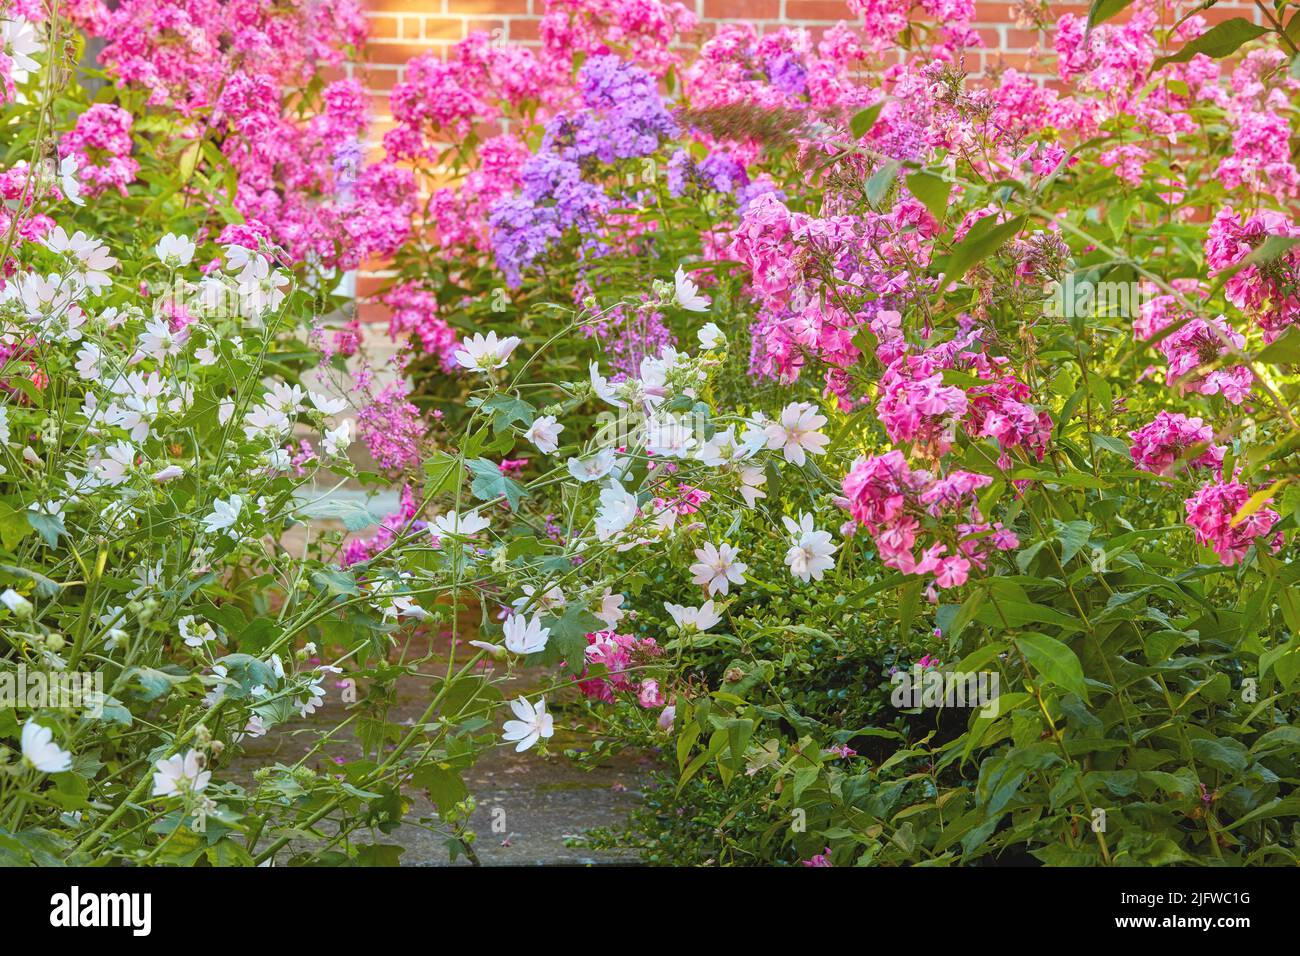 A garden with white cuckoo flowers and Phlox Paniculata Pink Flame flowers. Bush of blooming flowers in the garden on a sunny day. A meadow filled Stock Photo